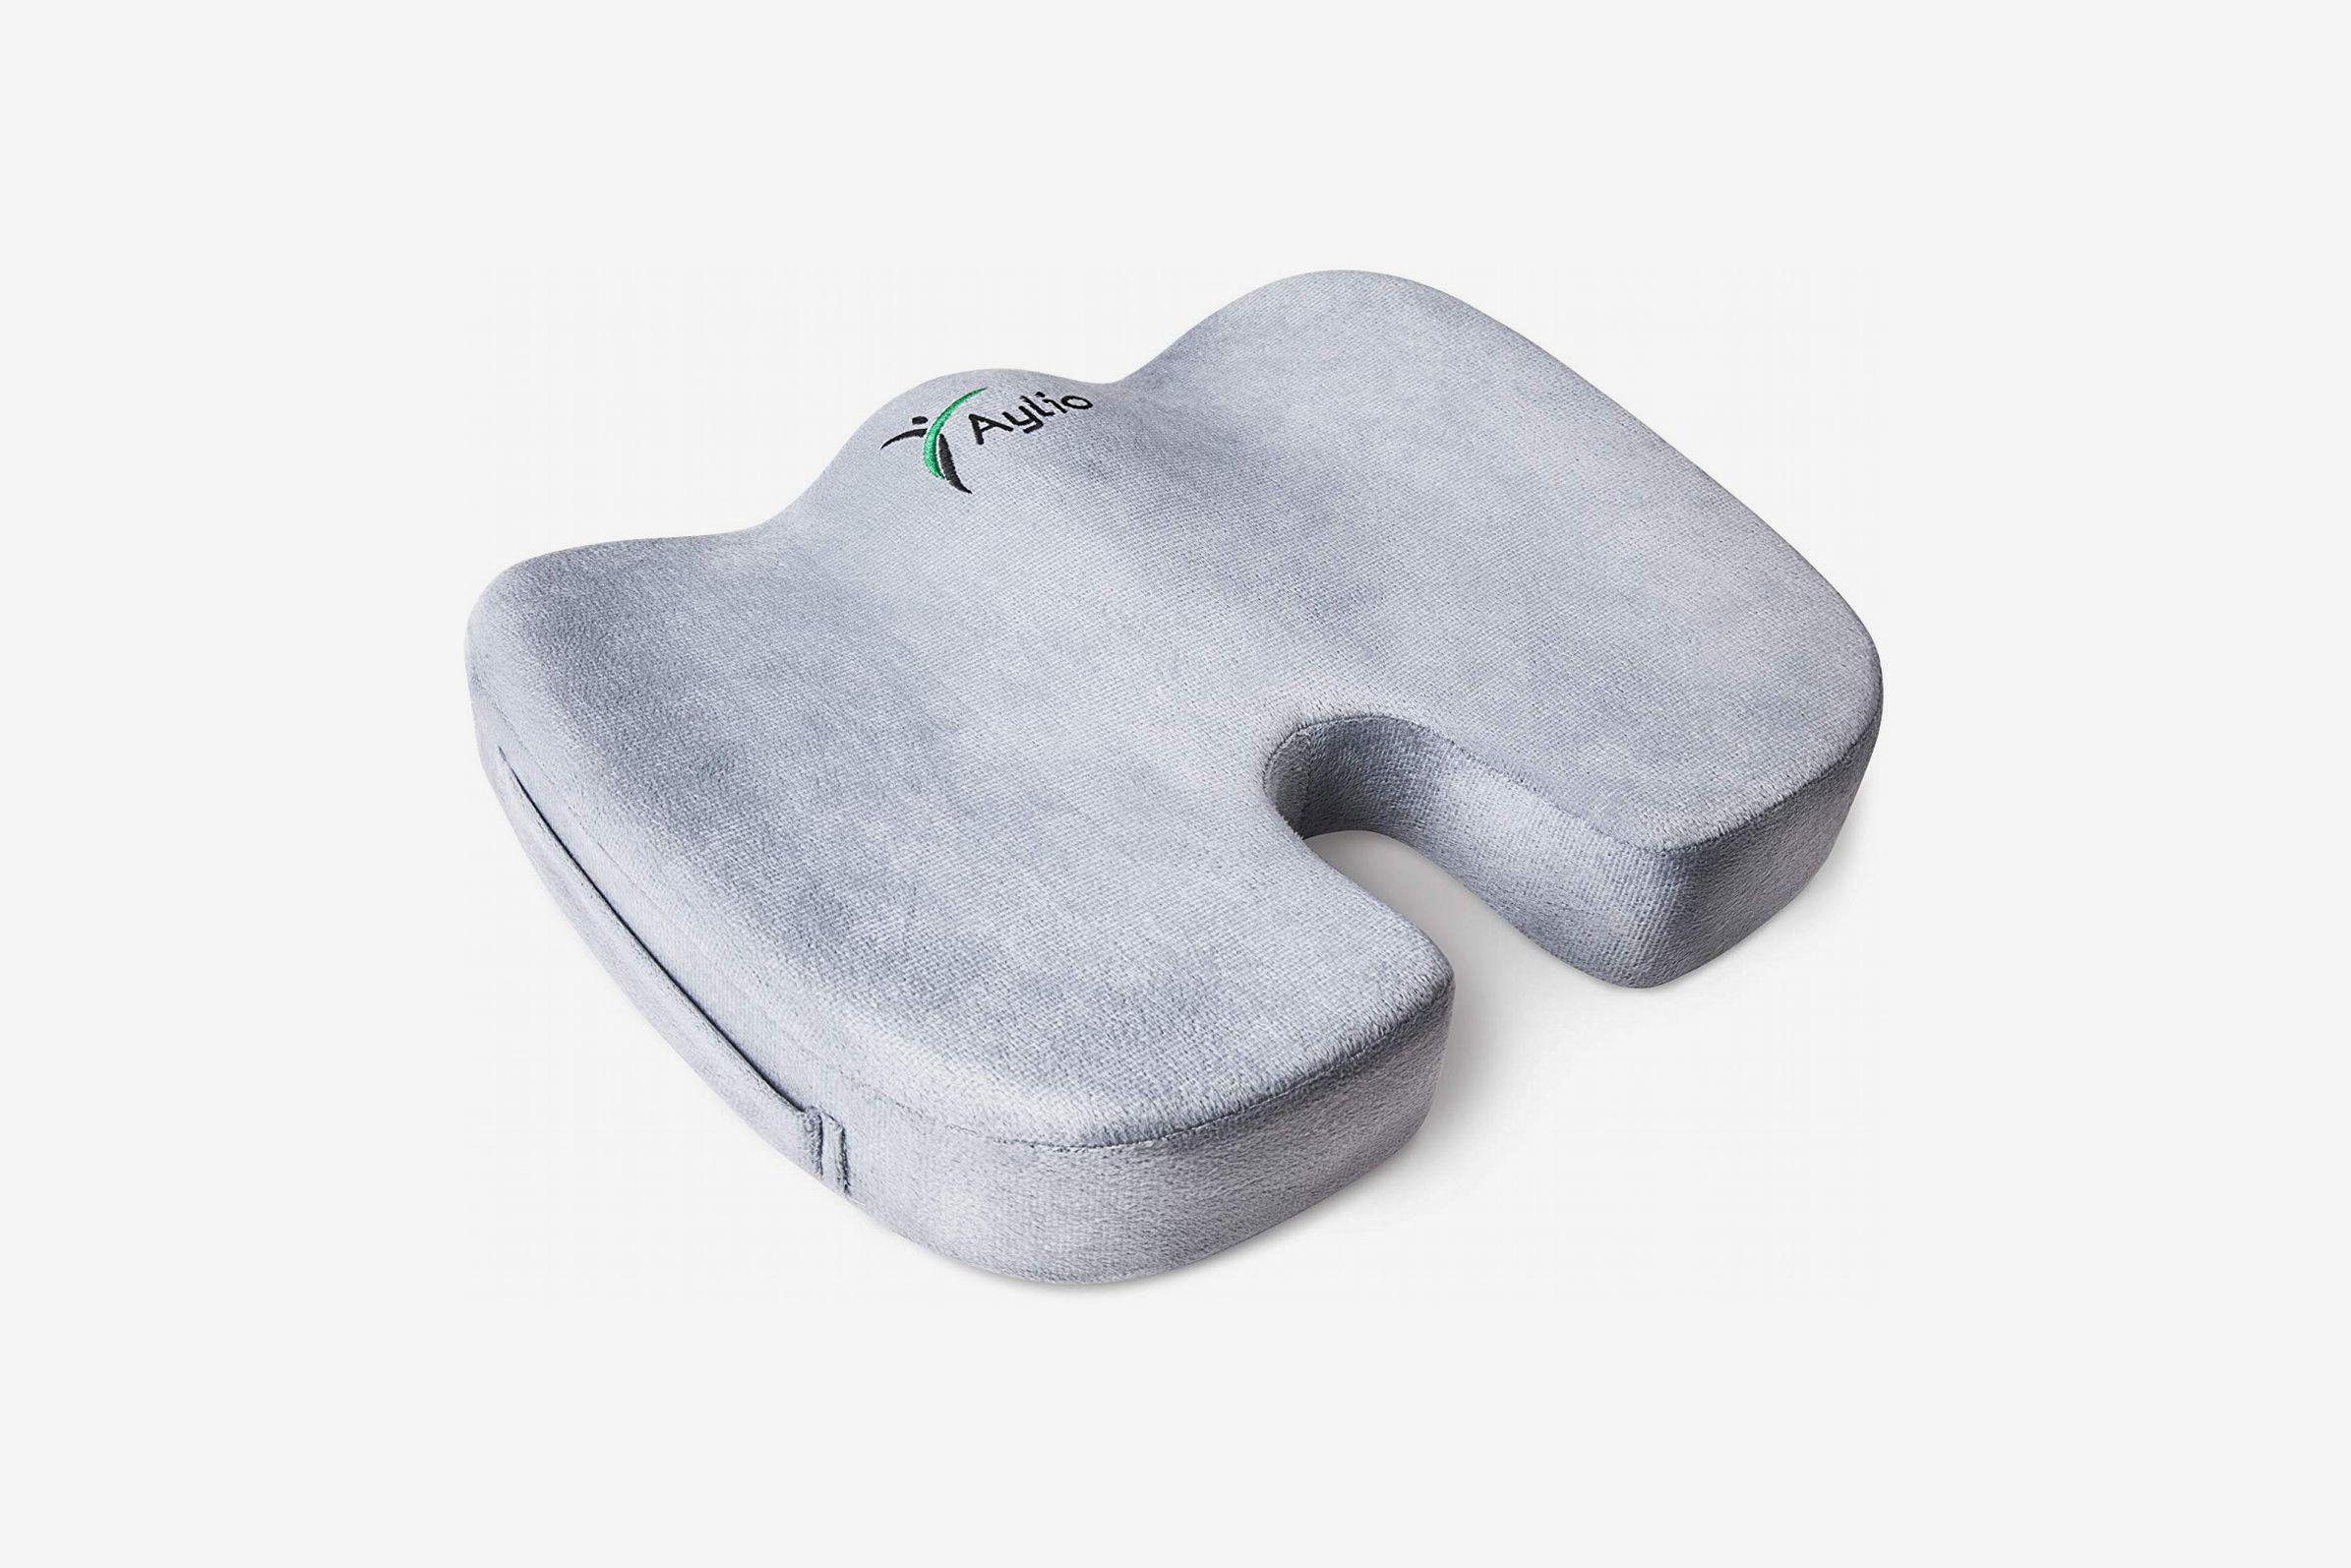 8 best support cushions to alleviate back pain from sitting too long, indy100